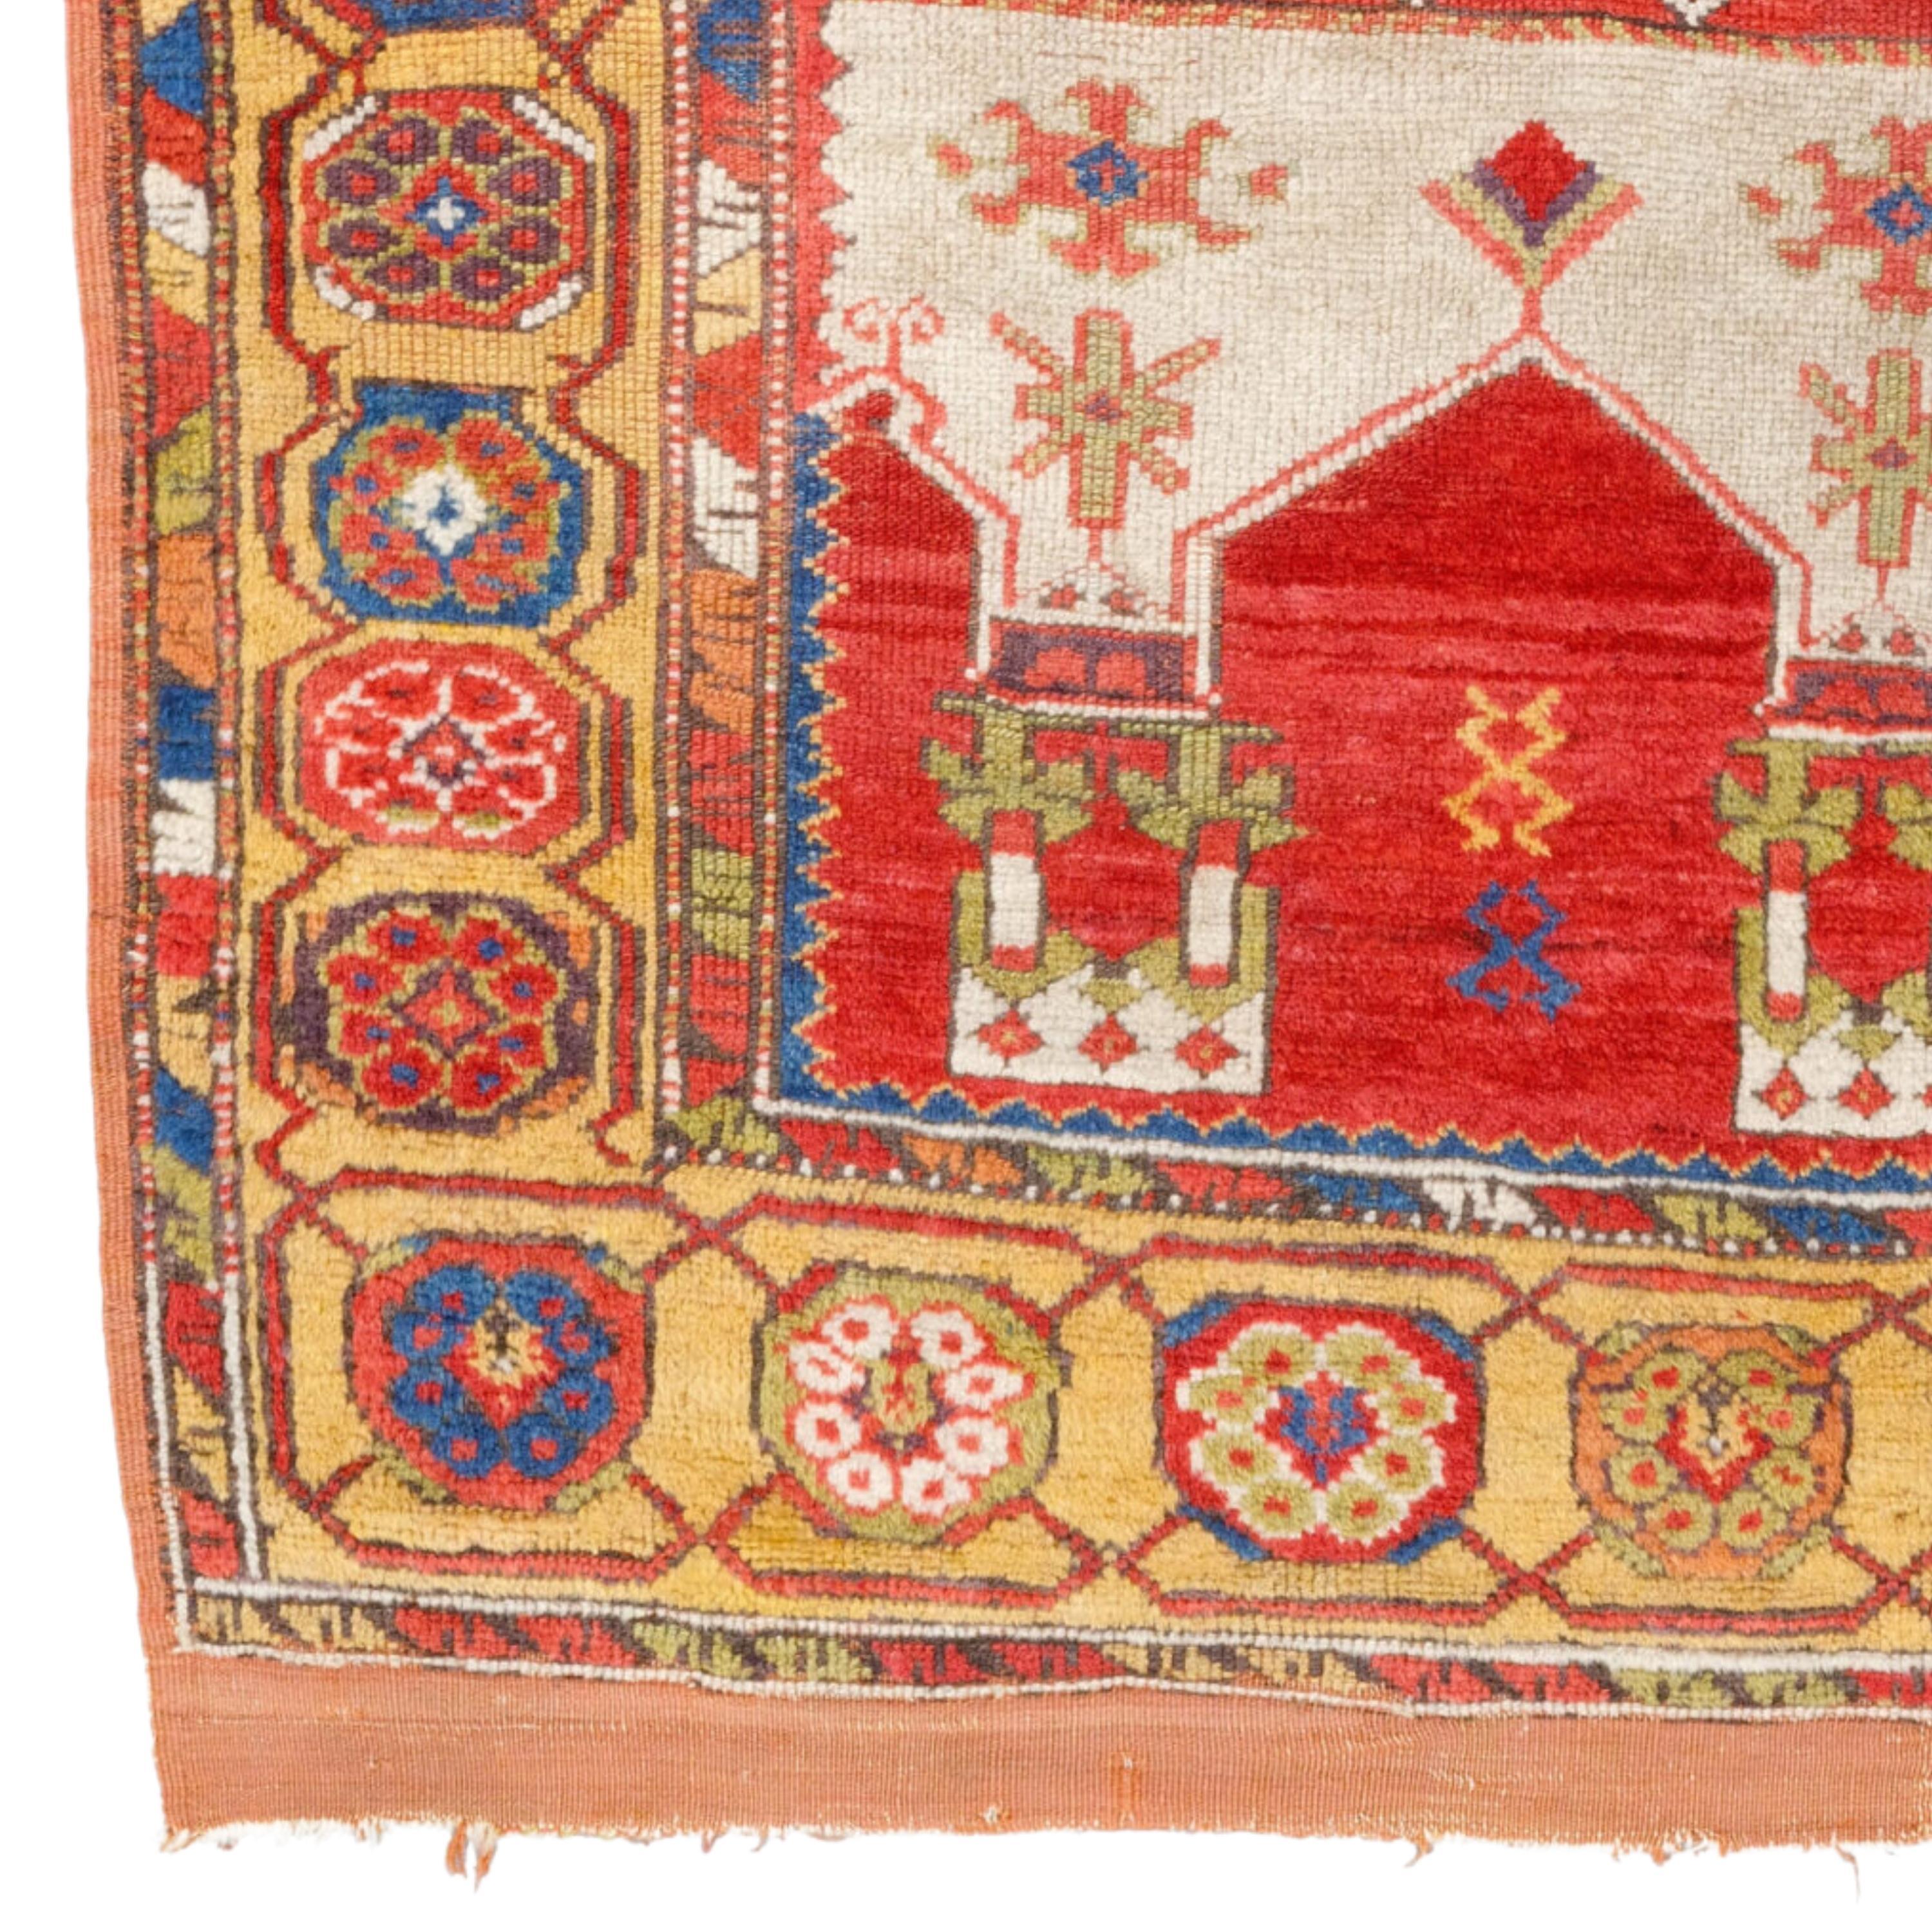 Antique Konya Prayer Rug - Early 19th Century Central Anatolian Konya Prayer Rug Size 113 x 160 cm (3,70 x 5,24 ft)

Konya carpet, floor covering handwoven in or near the city of Konya in south-central Turkey. A group of early carpet fragments has